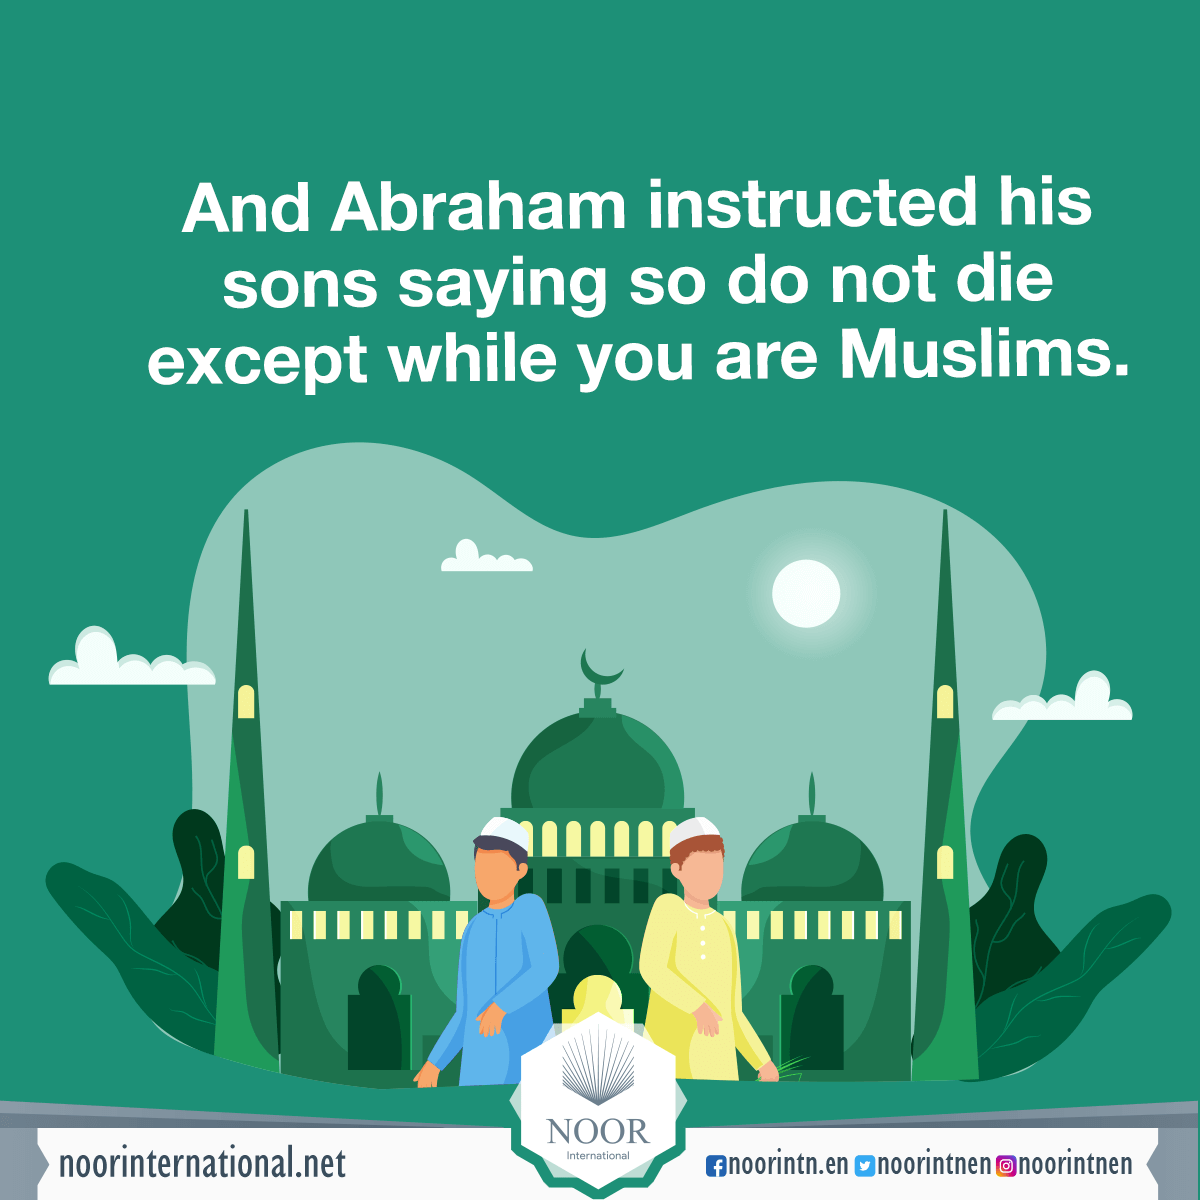 And Abraham instructed his sons saying: so do not die except while you are Muslims